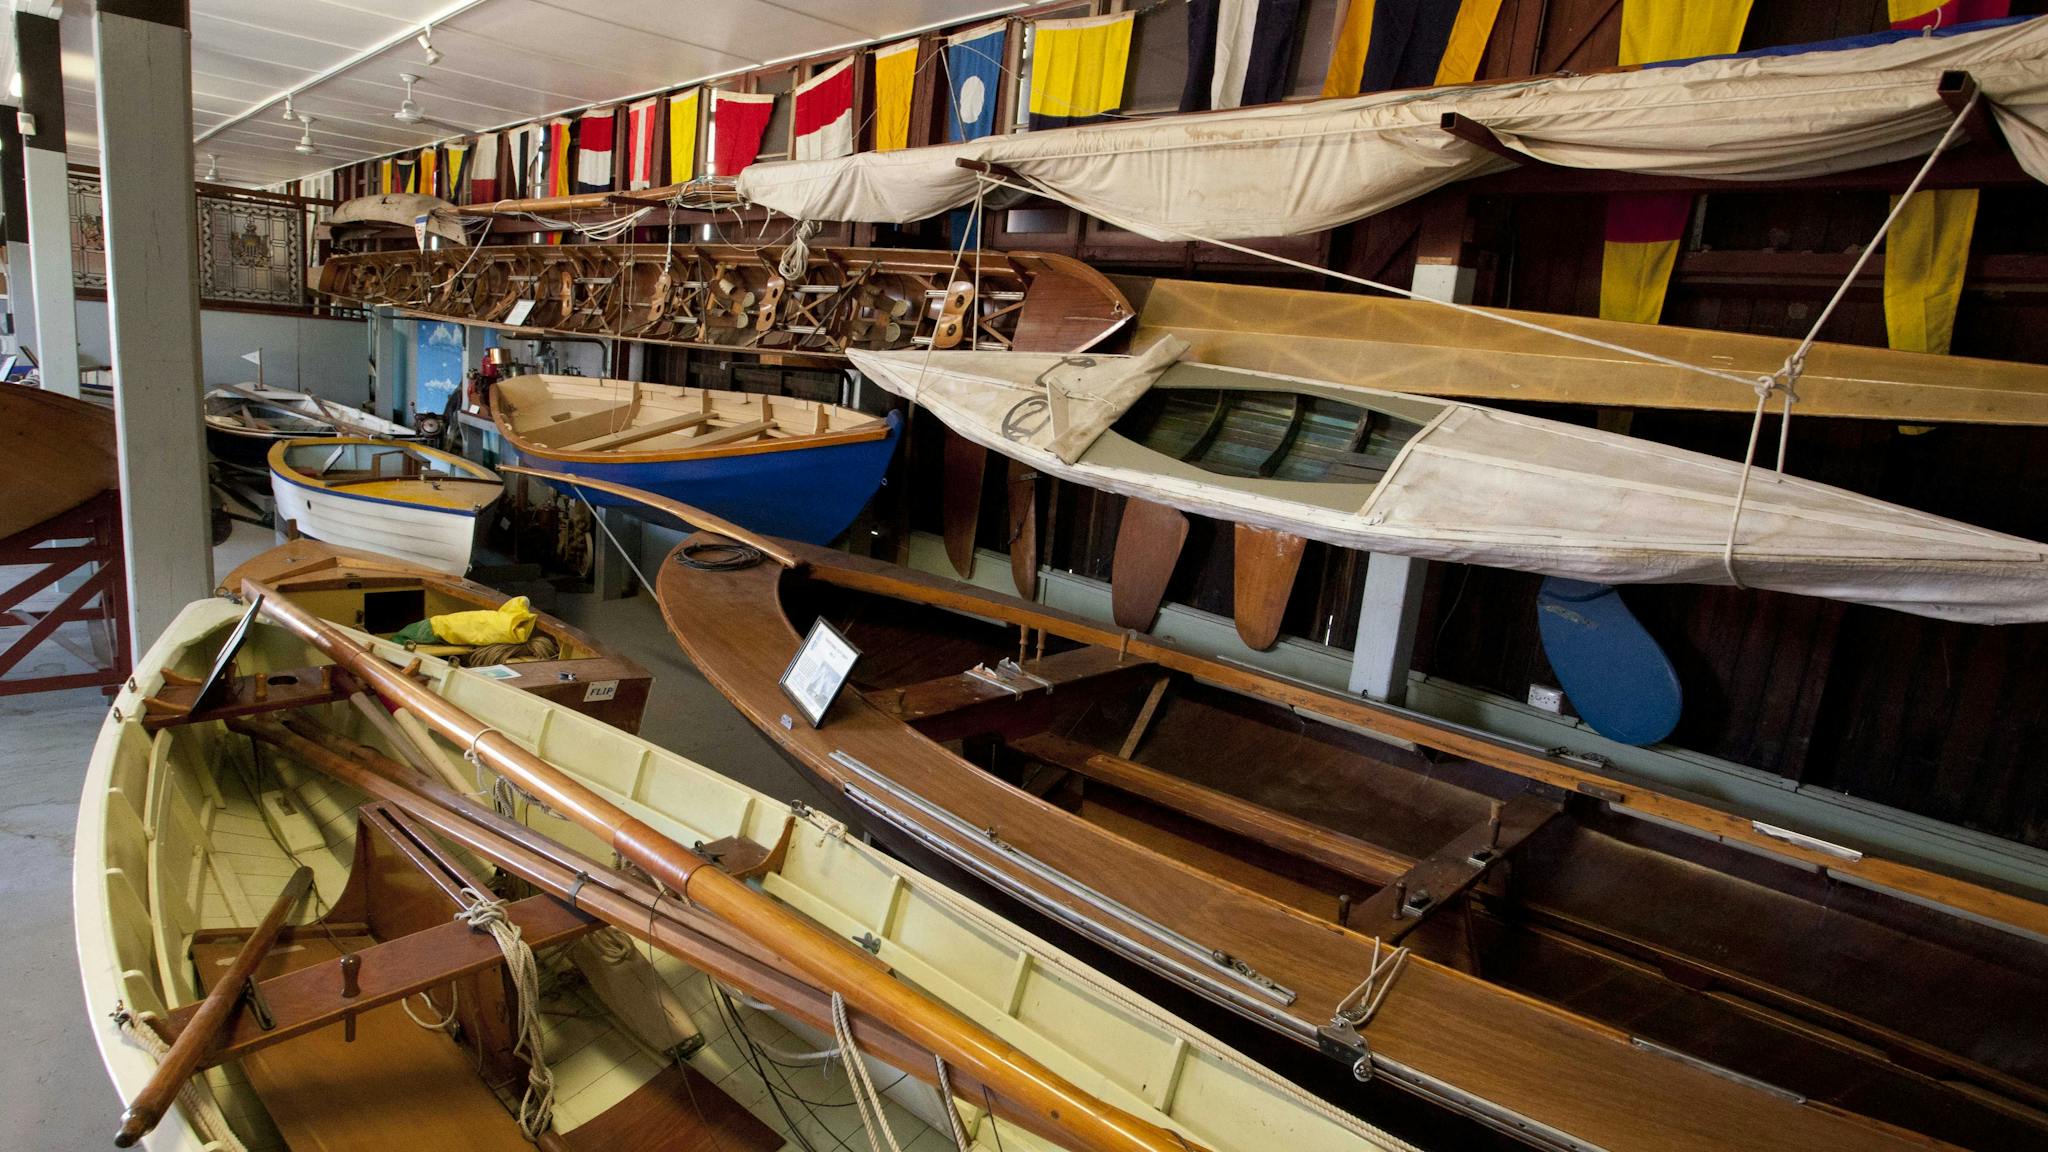 Display of small boats at the Maritime Museum